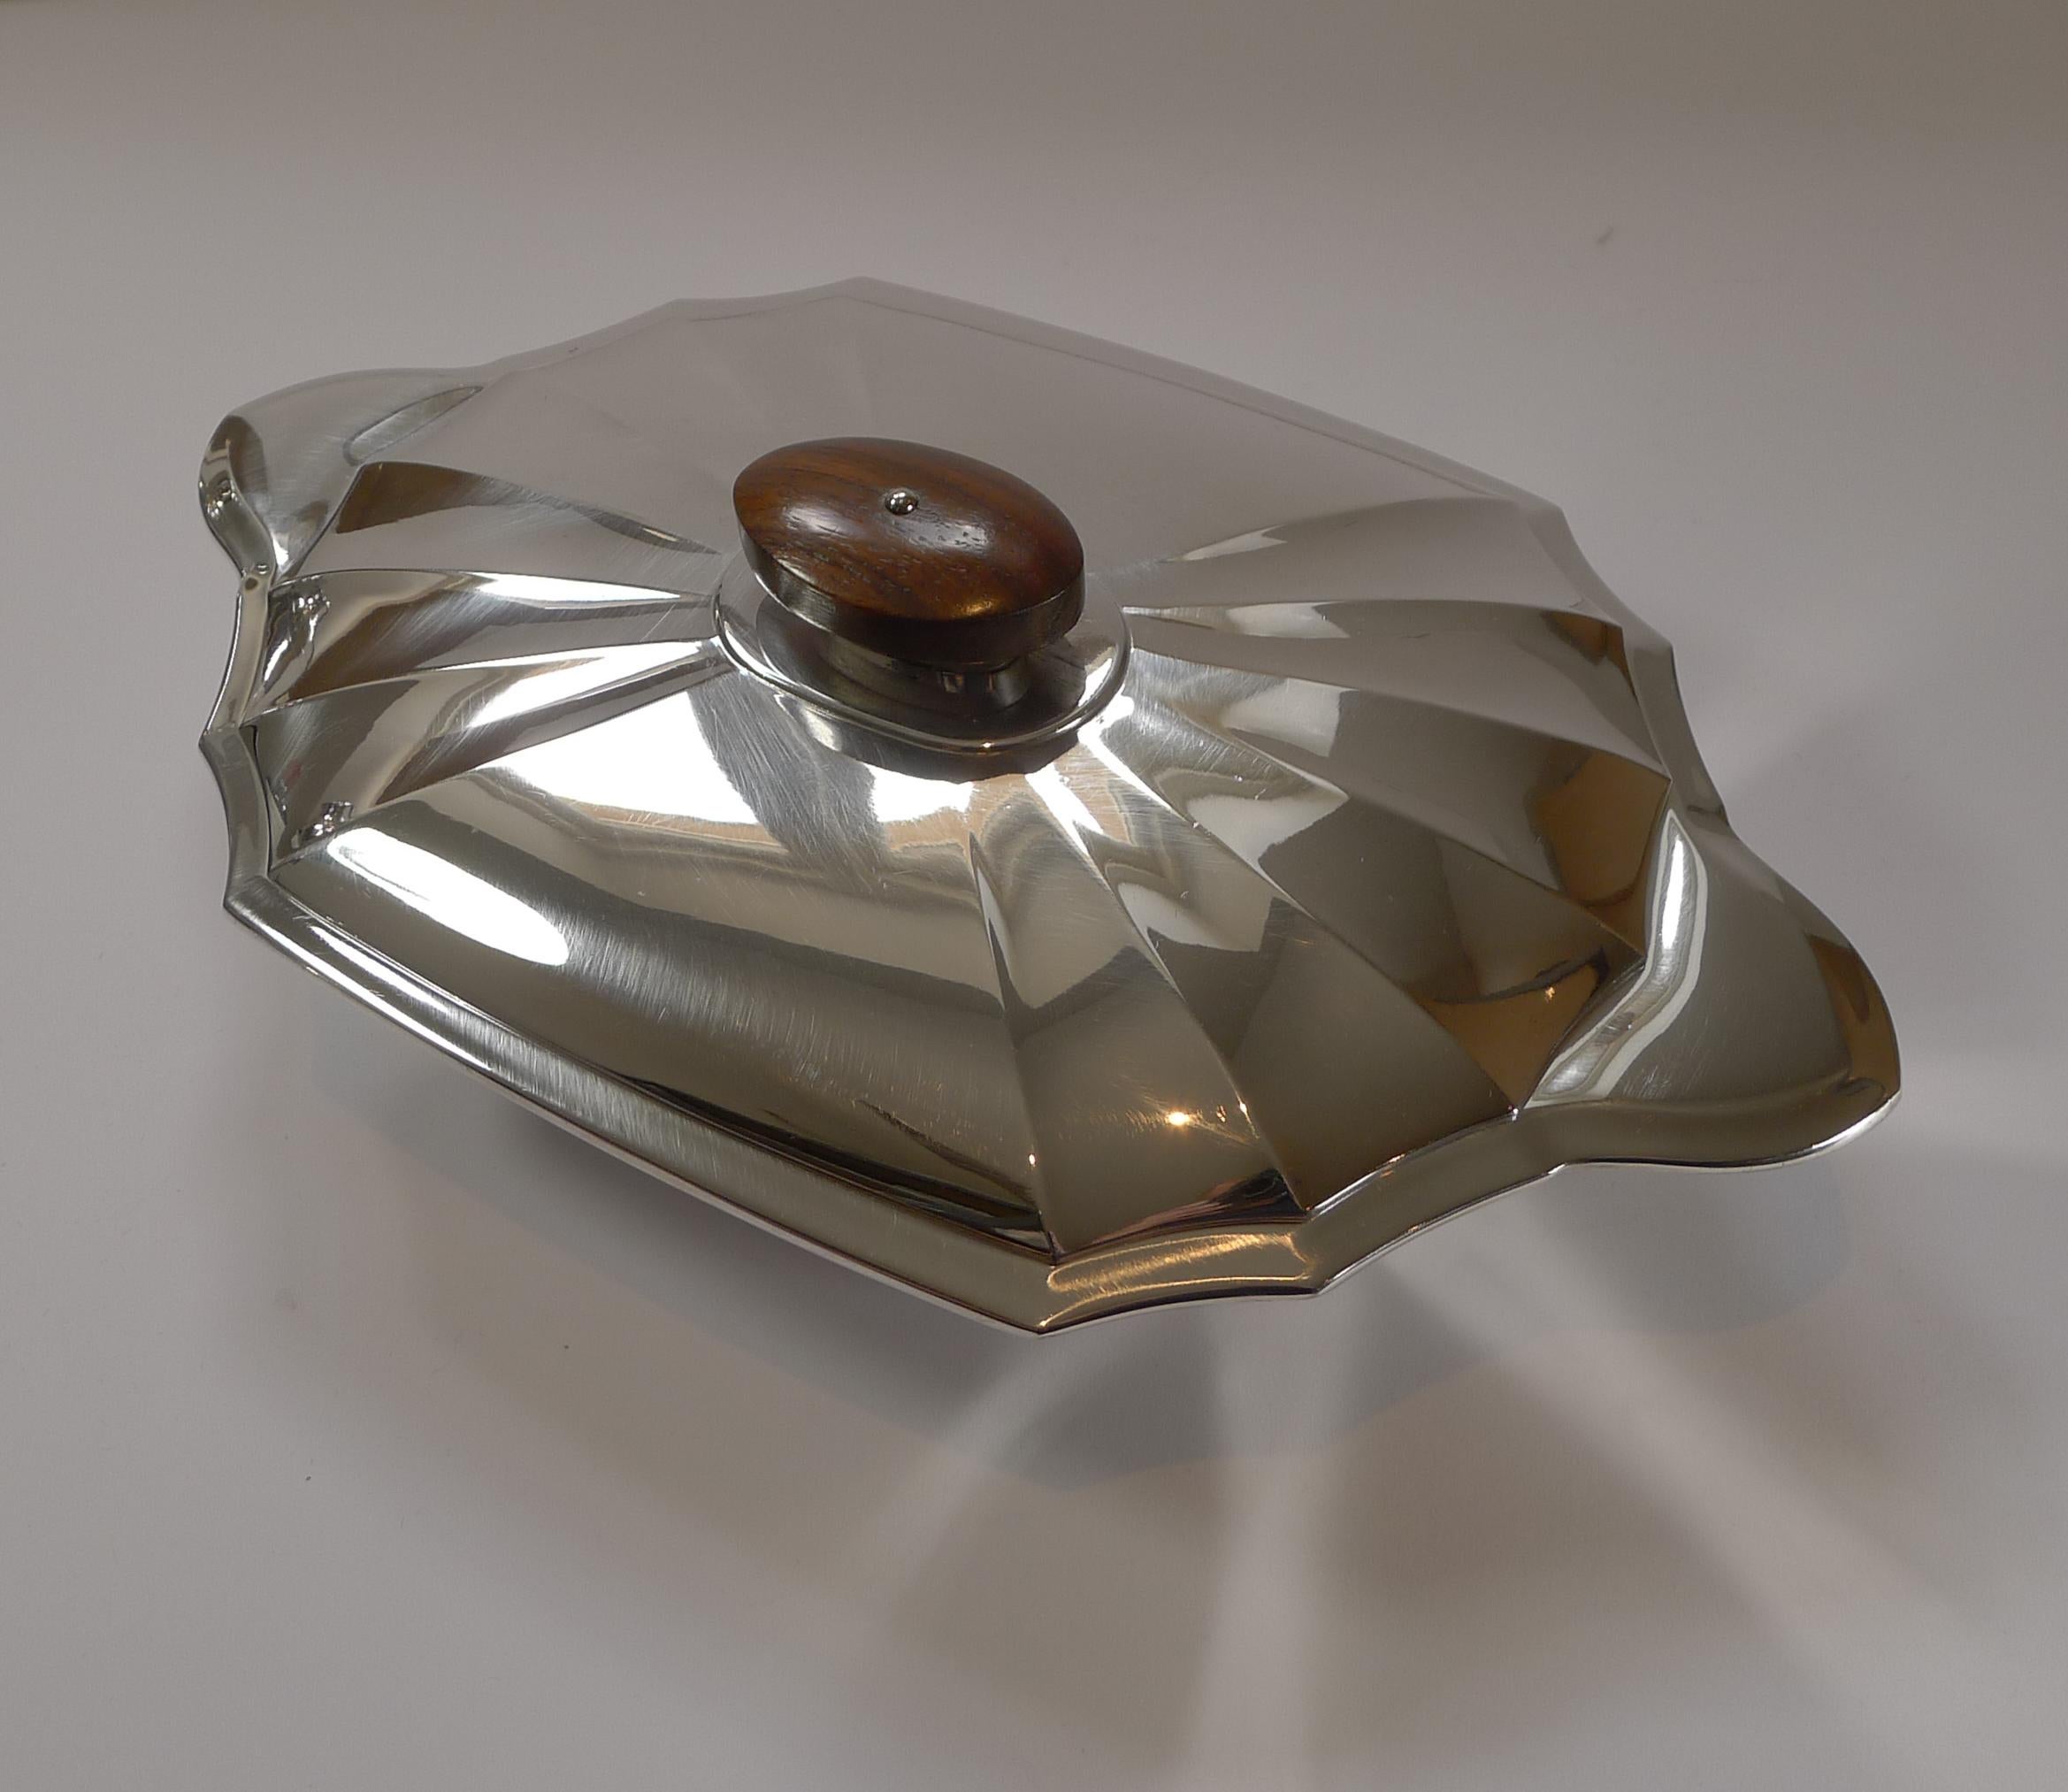 French Art Deco Christofle / Gallia Covered Serving Dish, c. 1930 For Sale 4